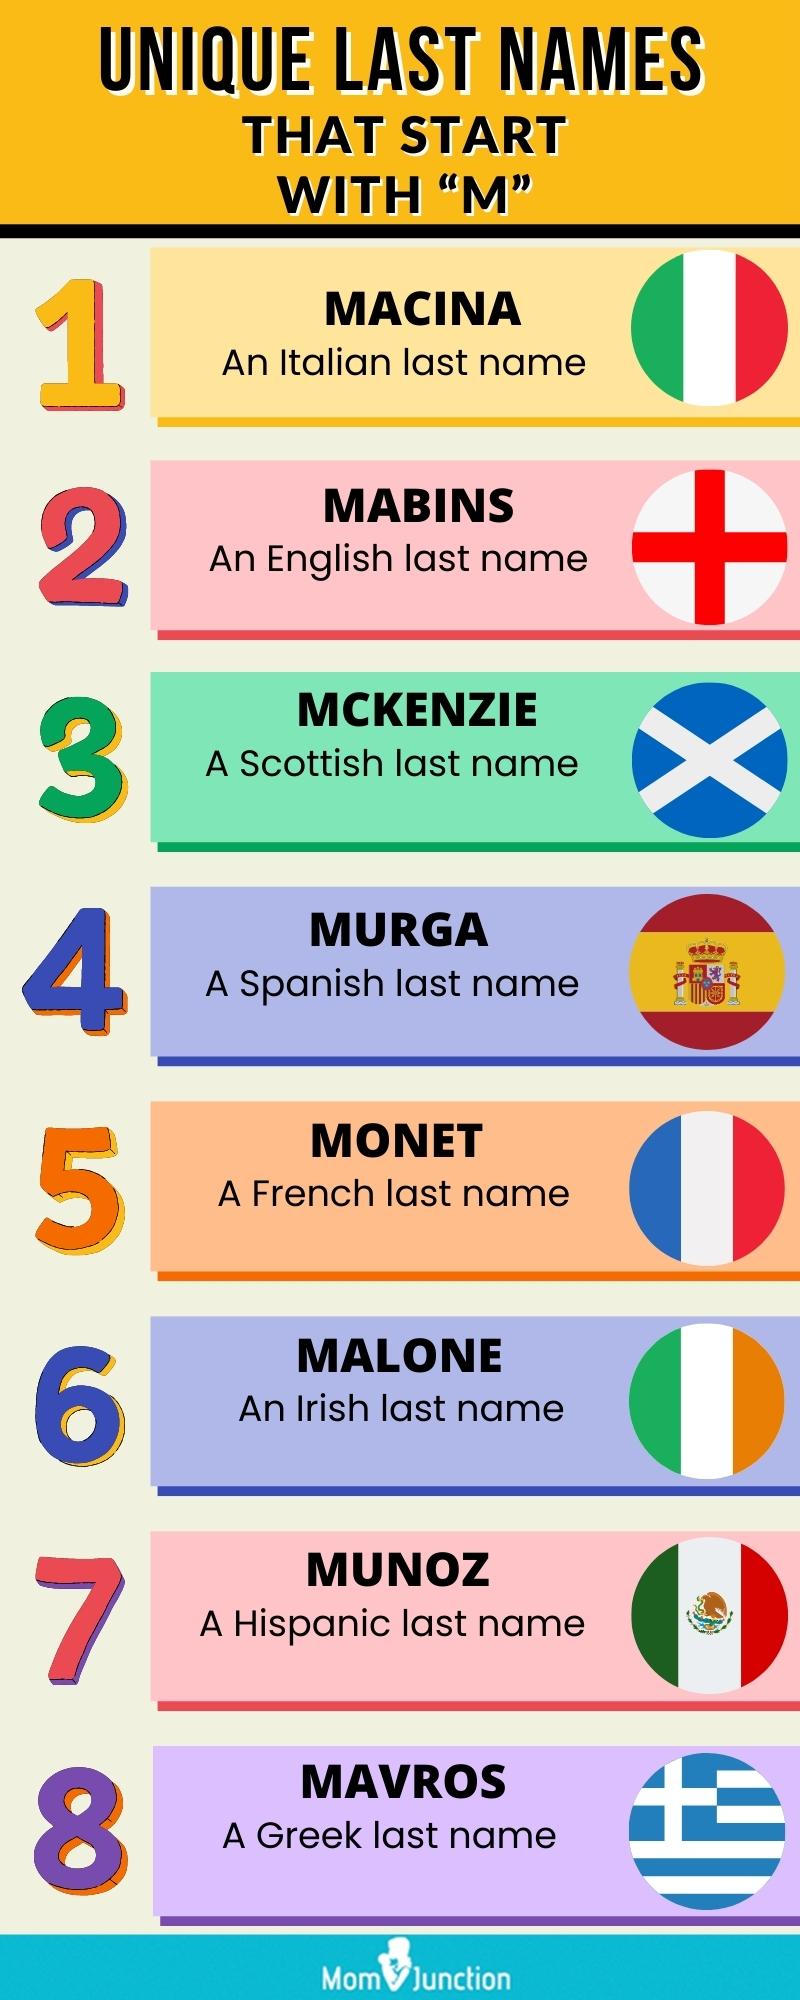 unique last names that start with m (infographic)